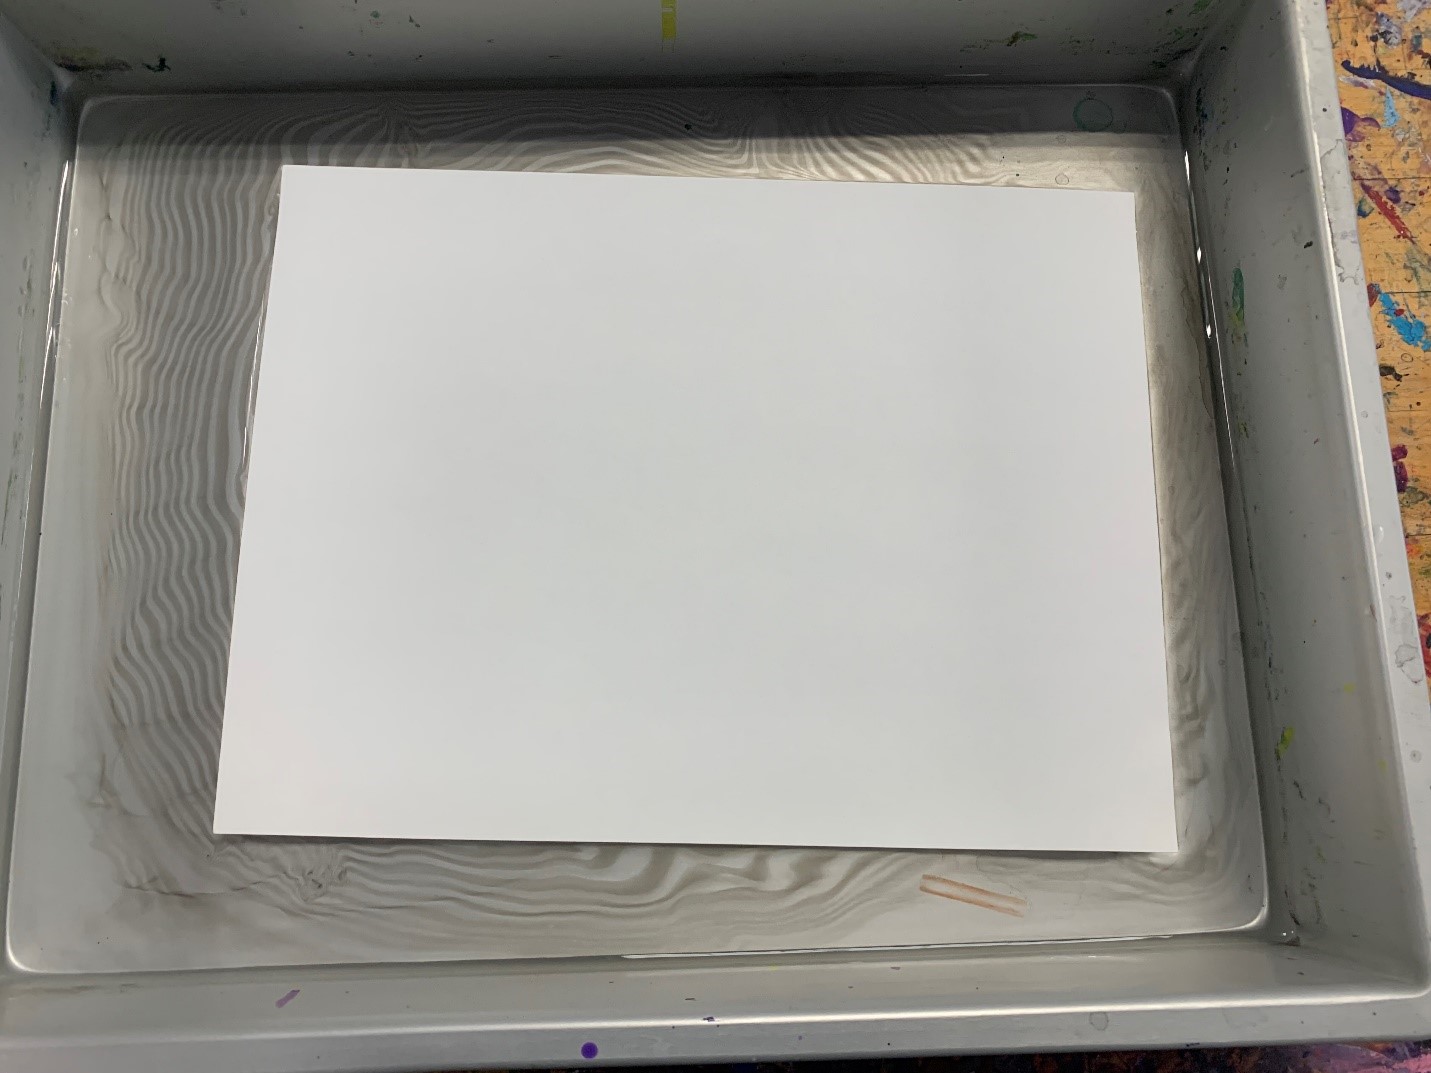 One piece of white paper floating on the water/ink design in tray